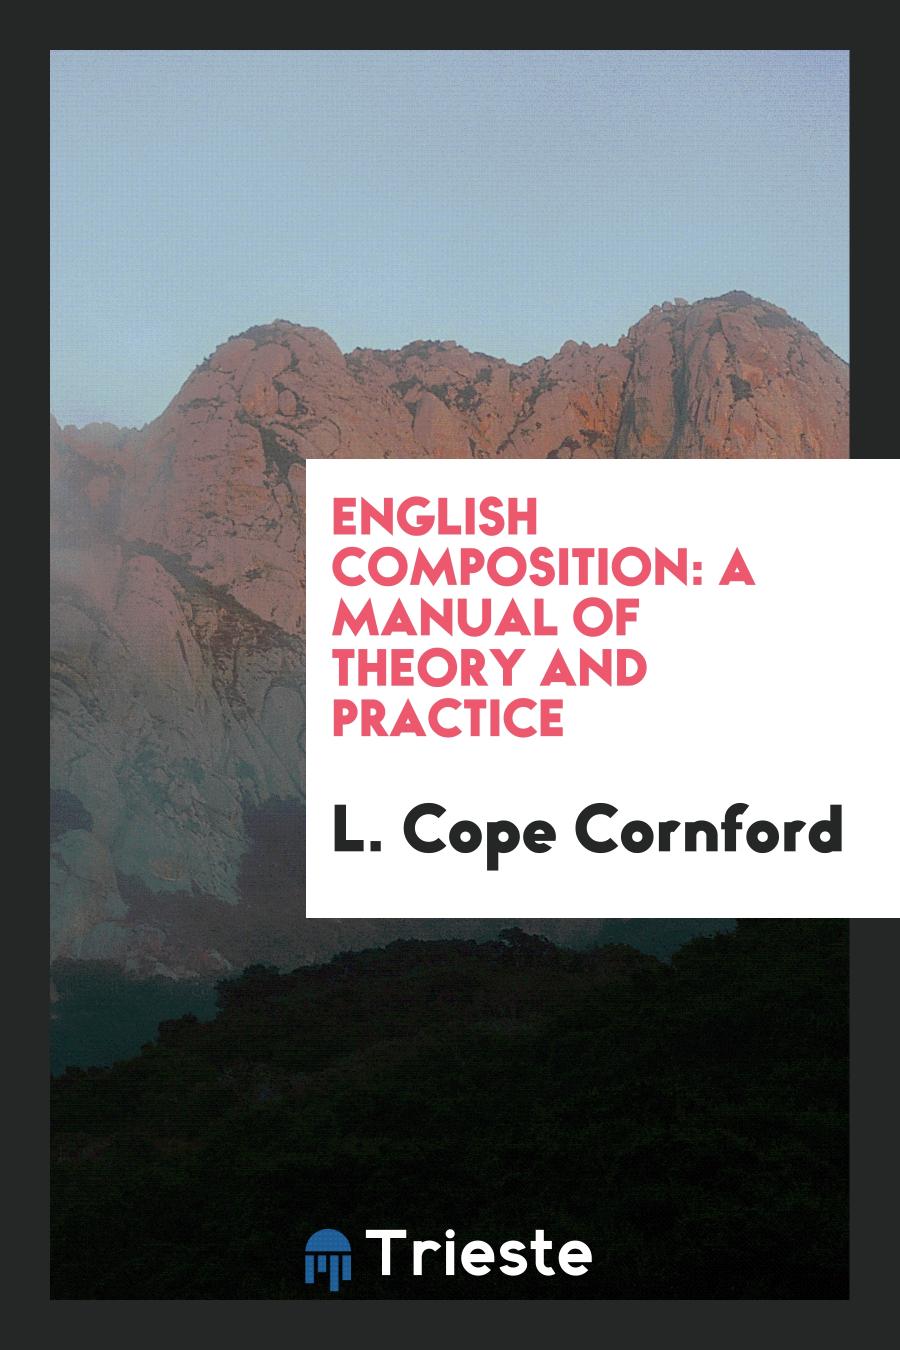 English Composition: A Manual of Theory and Practice